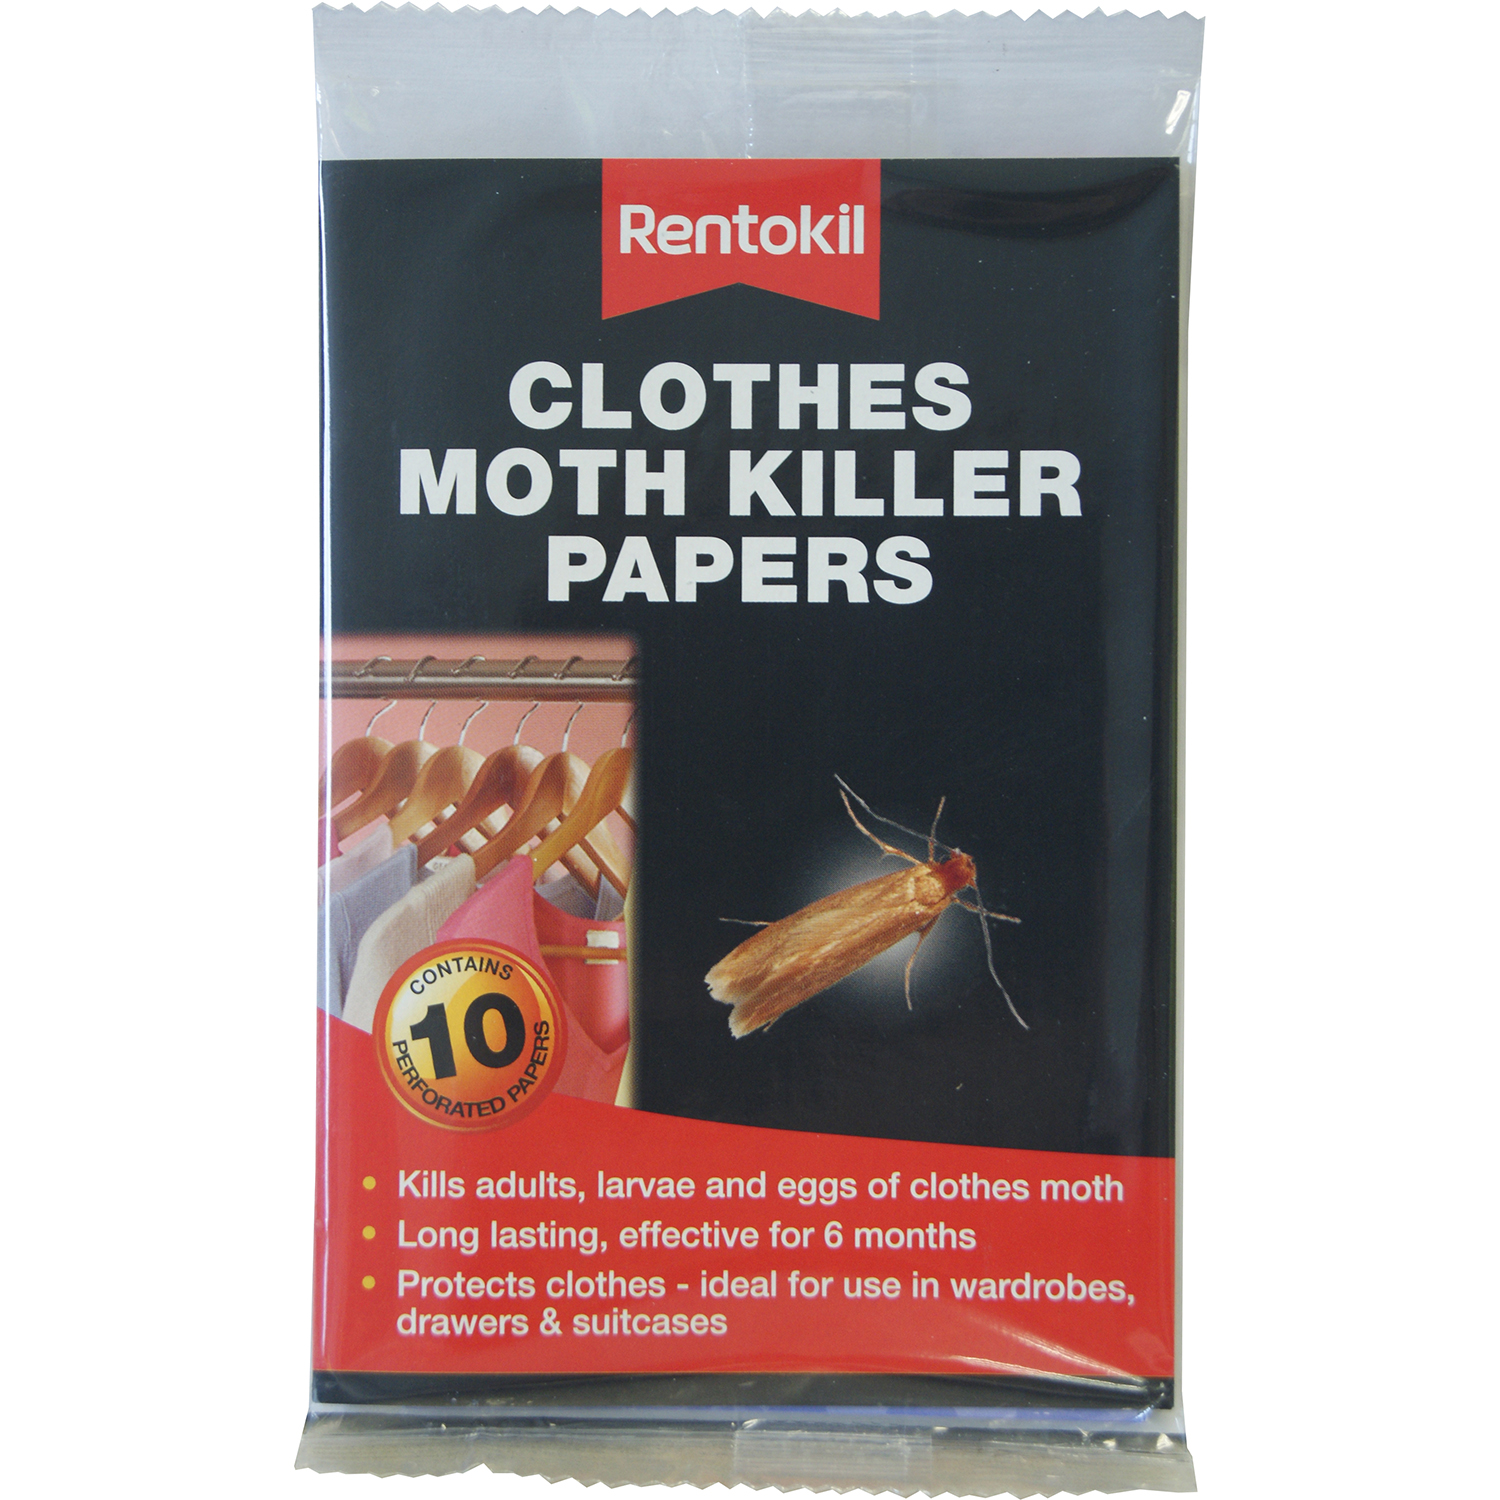 RENTOKIL CLOTHES MOTH KILLER PAPERS 10 PACK